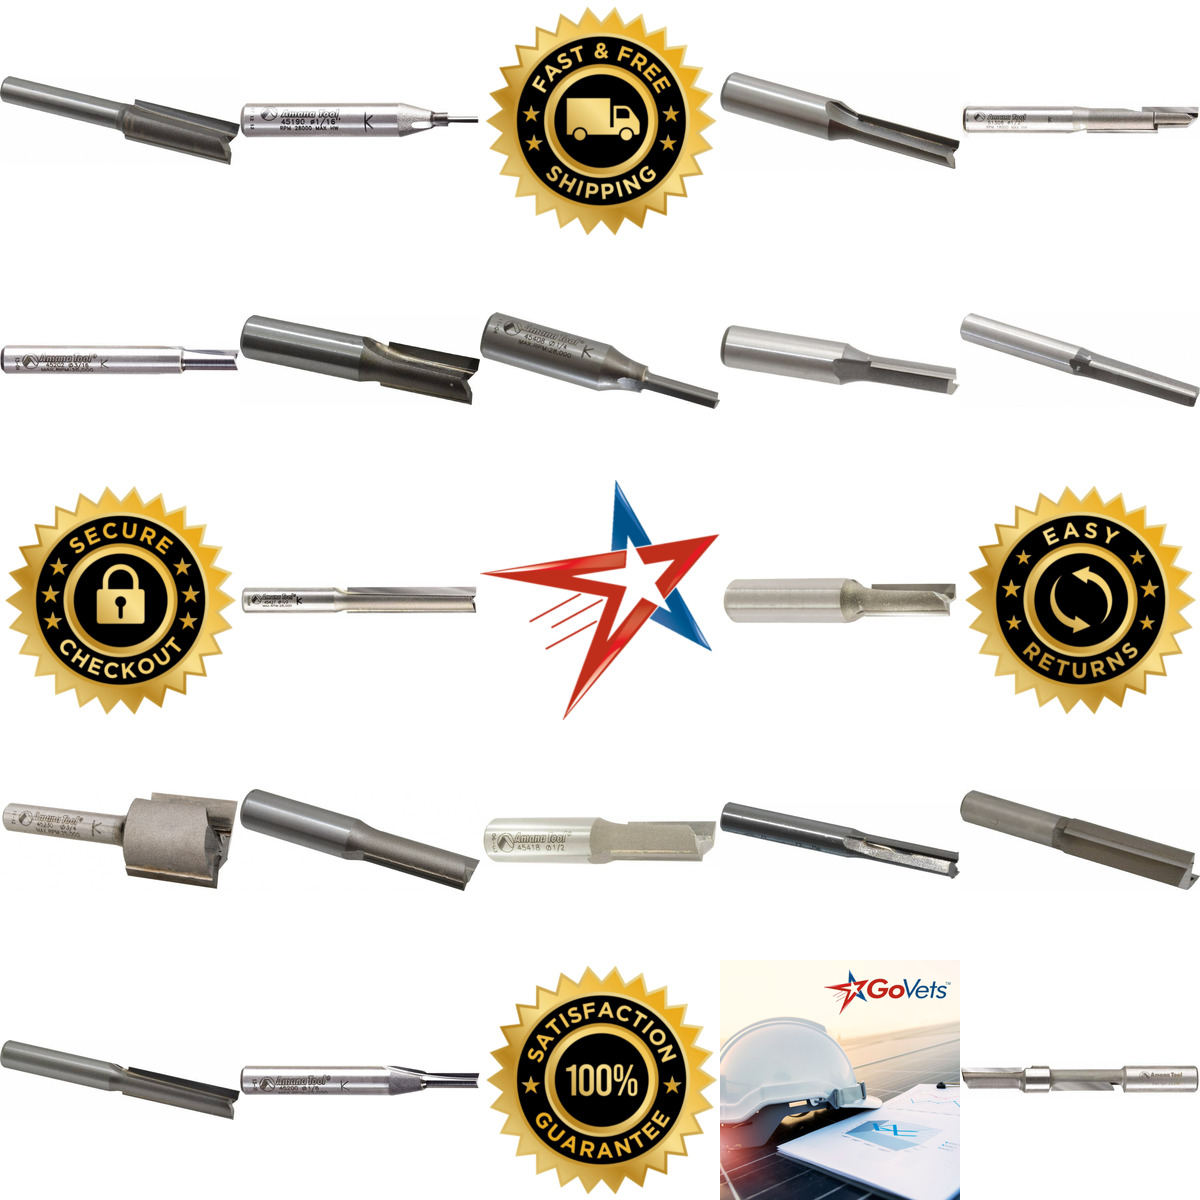 A selection of Amana Tool products on GoVets